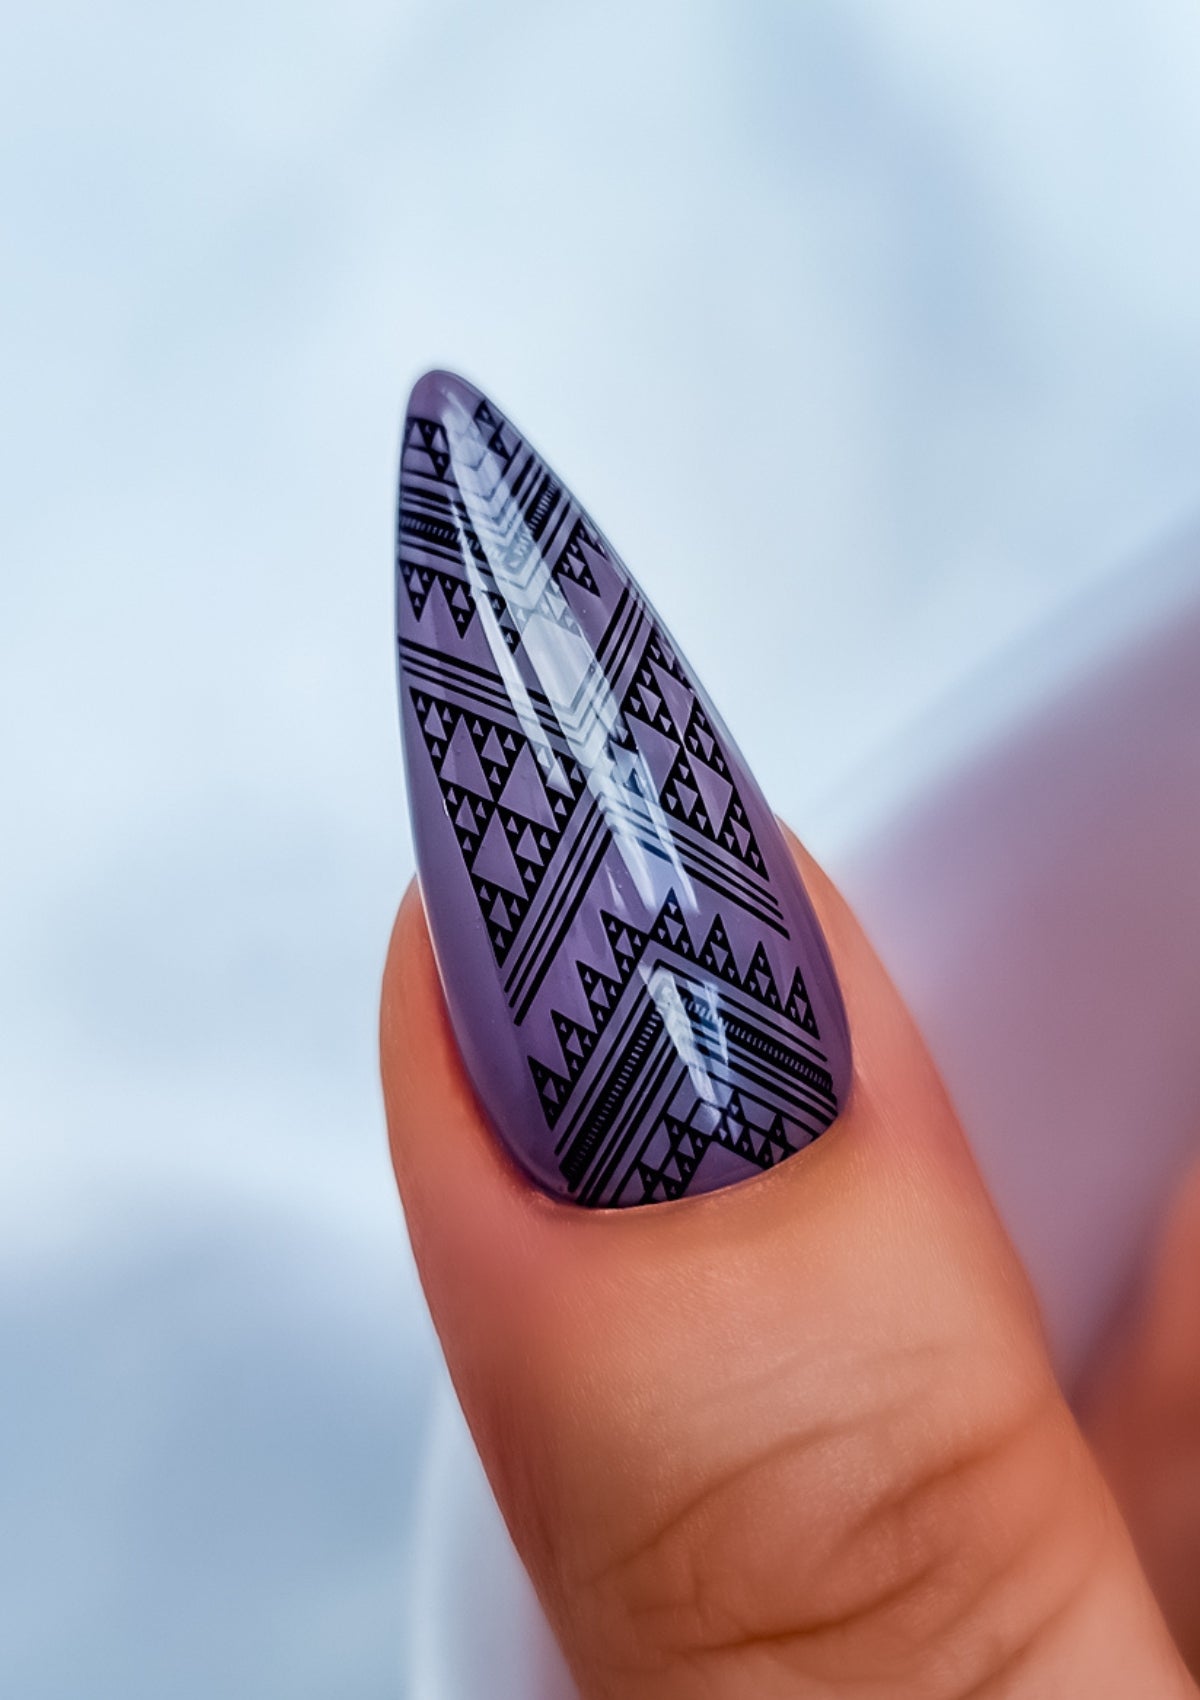 Long almond shaped thumb nail in mauve with black Maori nail art. Nail art design in Taniko Hou pattern by Adrienne Whitewood.  